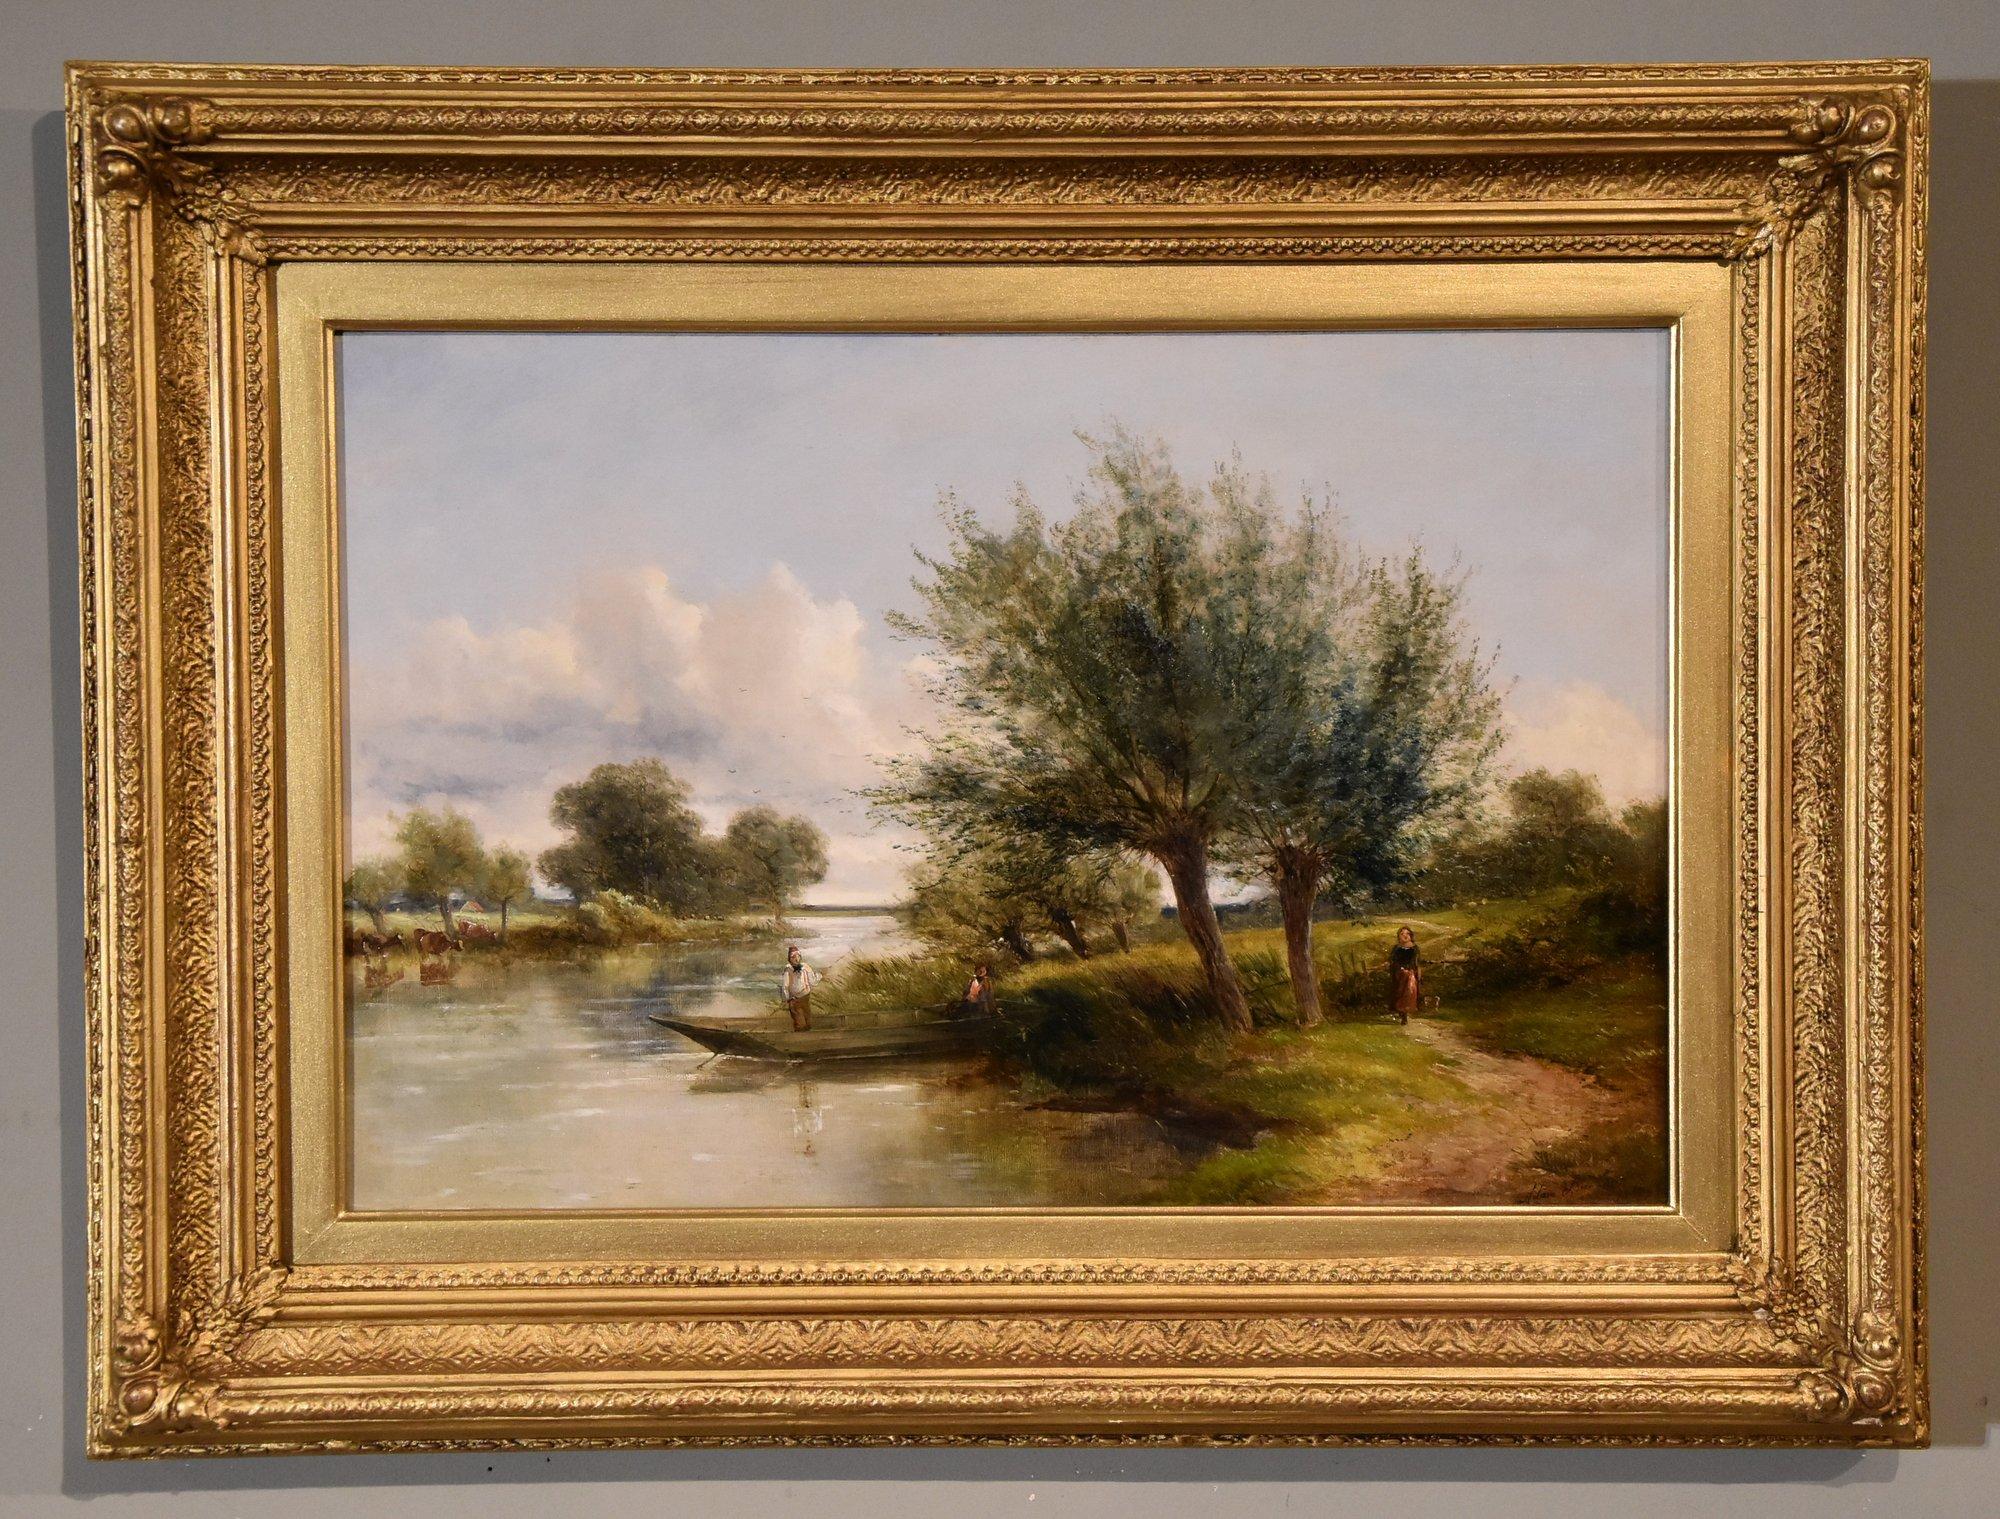 Oil Painting by Adam Barland "Near Medmenham on Thames" 1843 - 1875 Home counties and highland who exhibited at the Royal Academy  and Academy and Royal Society of British artists. oil on canvas. Signed and dated 1864 original frame

Dimensions